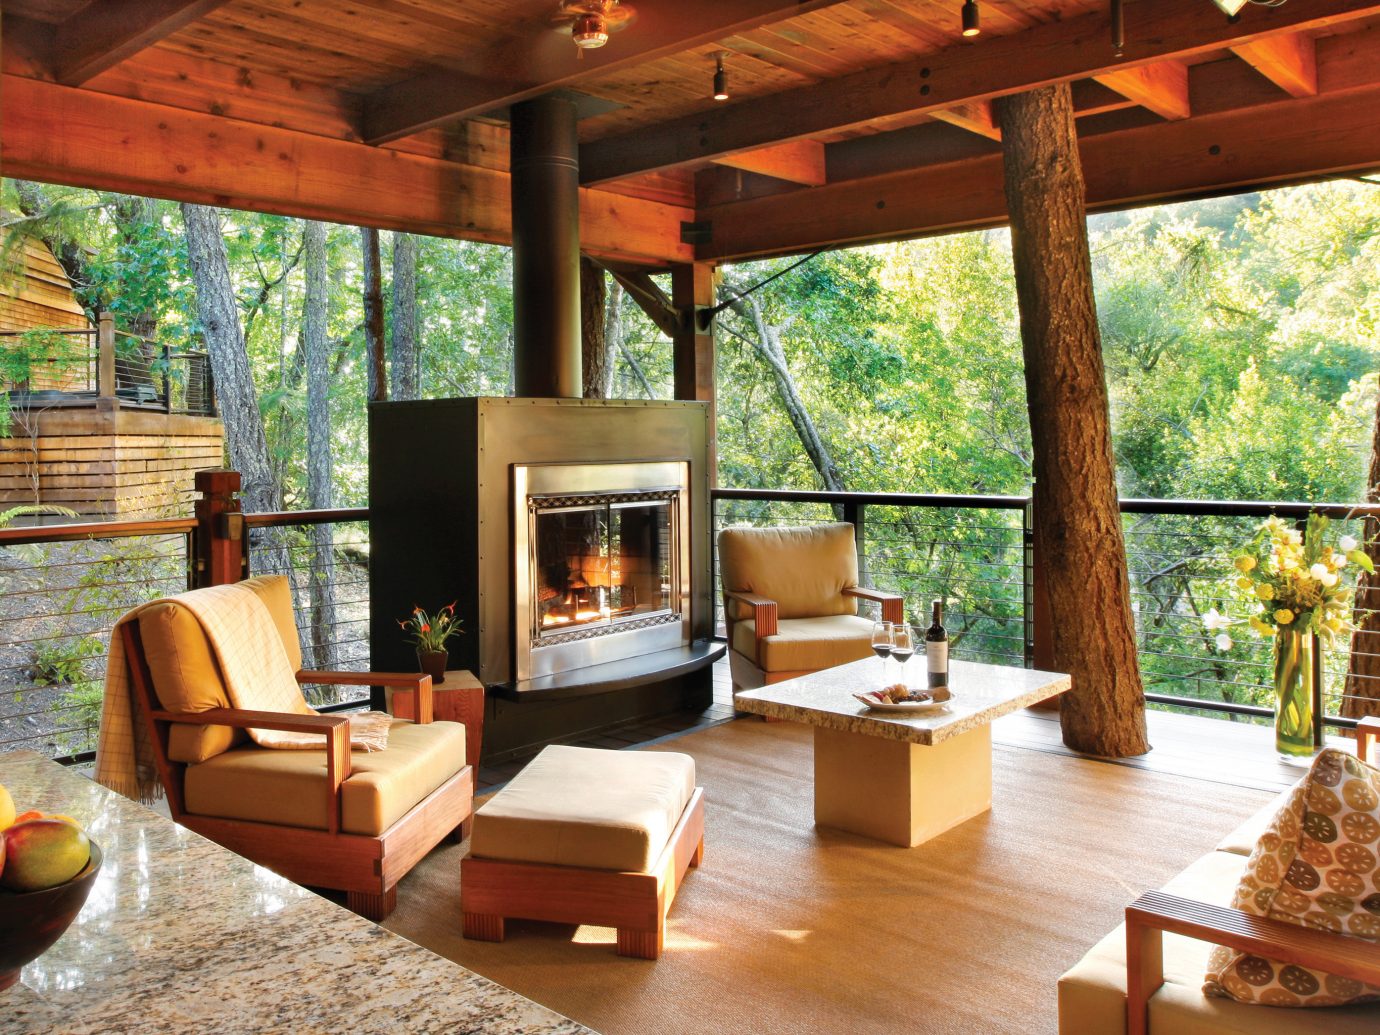 Eco Fireplace Food + Drink Hotels Luxury Outdoors Ranch Romance Romantic Rustic Scenic views Trip Ideas Wellness table indoor Living room property window estate Resort wooden living room home Villa cottage interior design real estate hacienda eco hotel outdoor structure farmhouse porch log cabin wood furniture